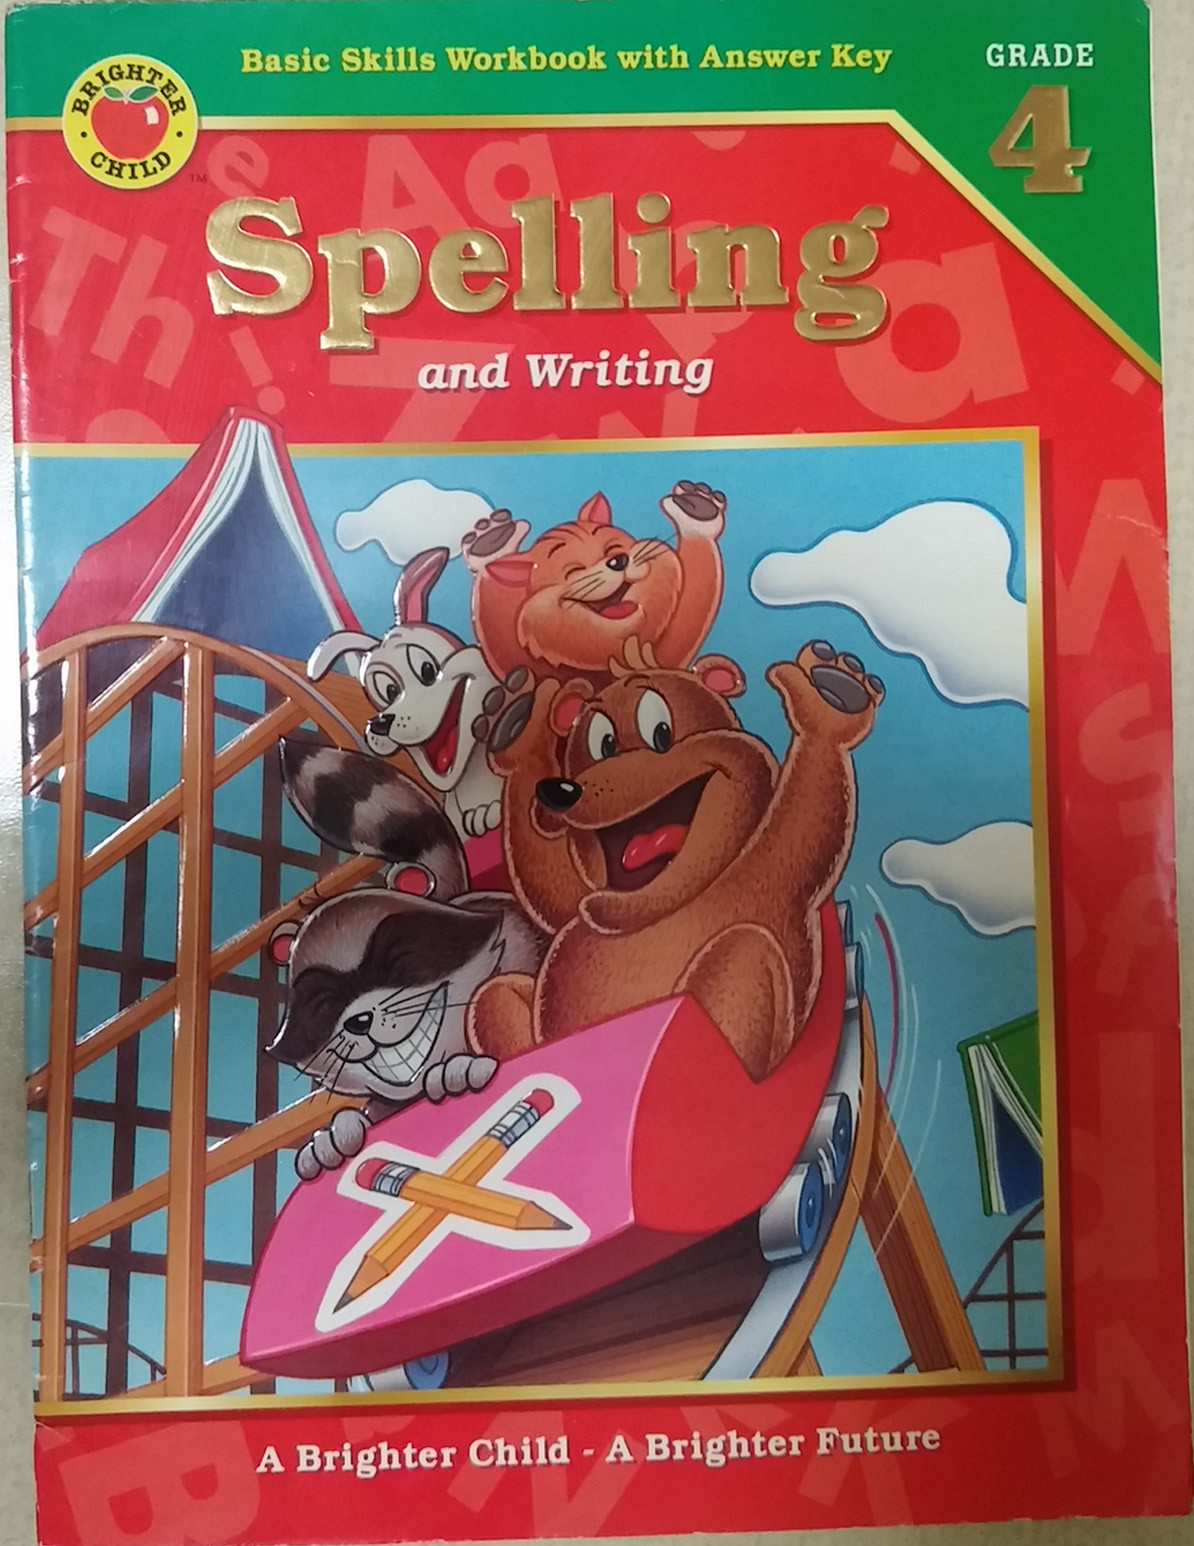 Spelling and Writing Grade 4/Basic Skills Workbook With Answer Key